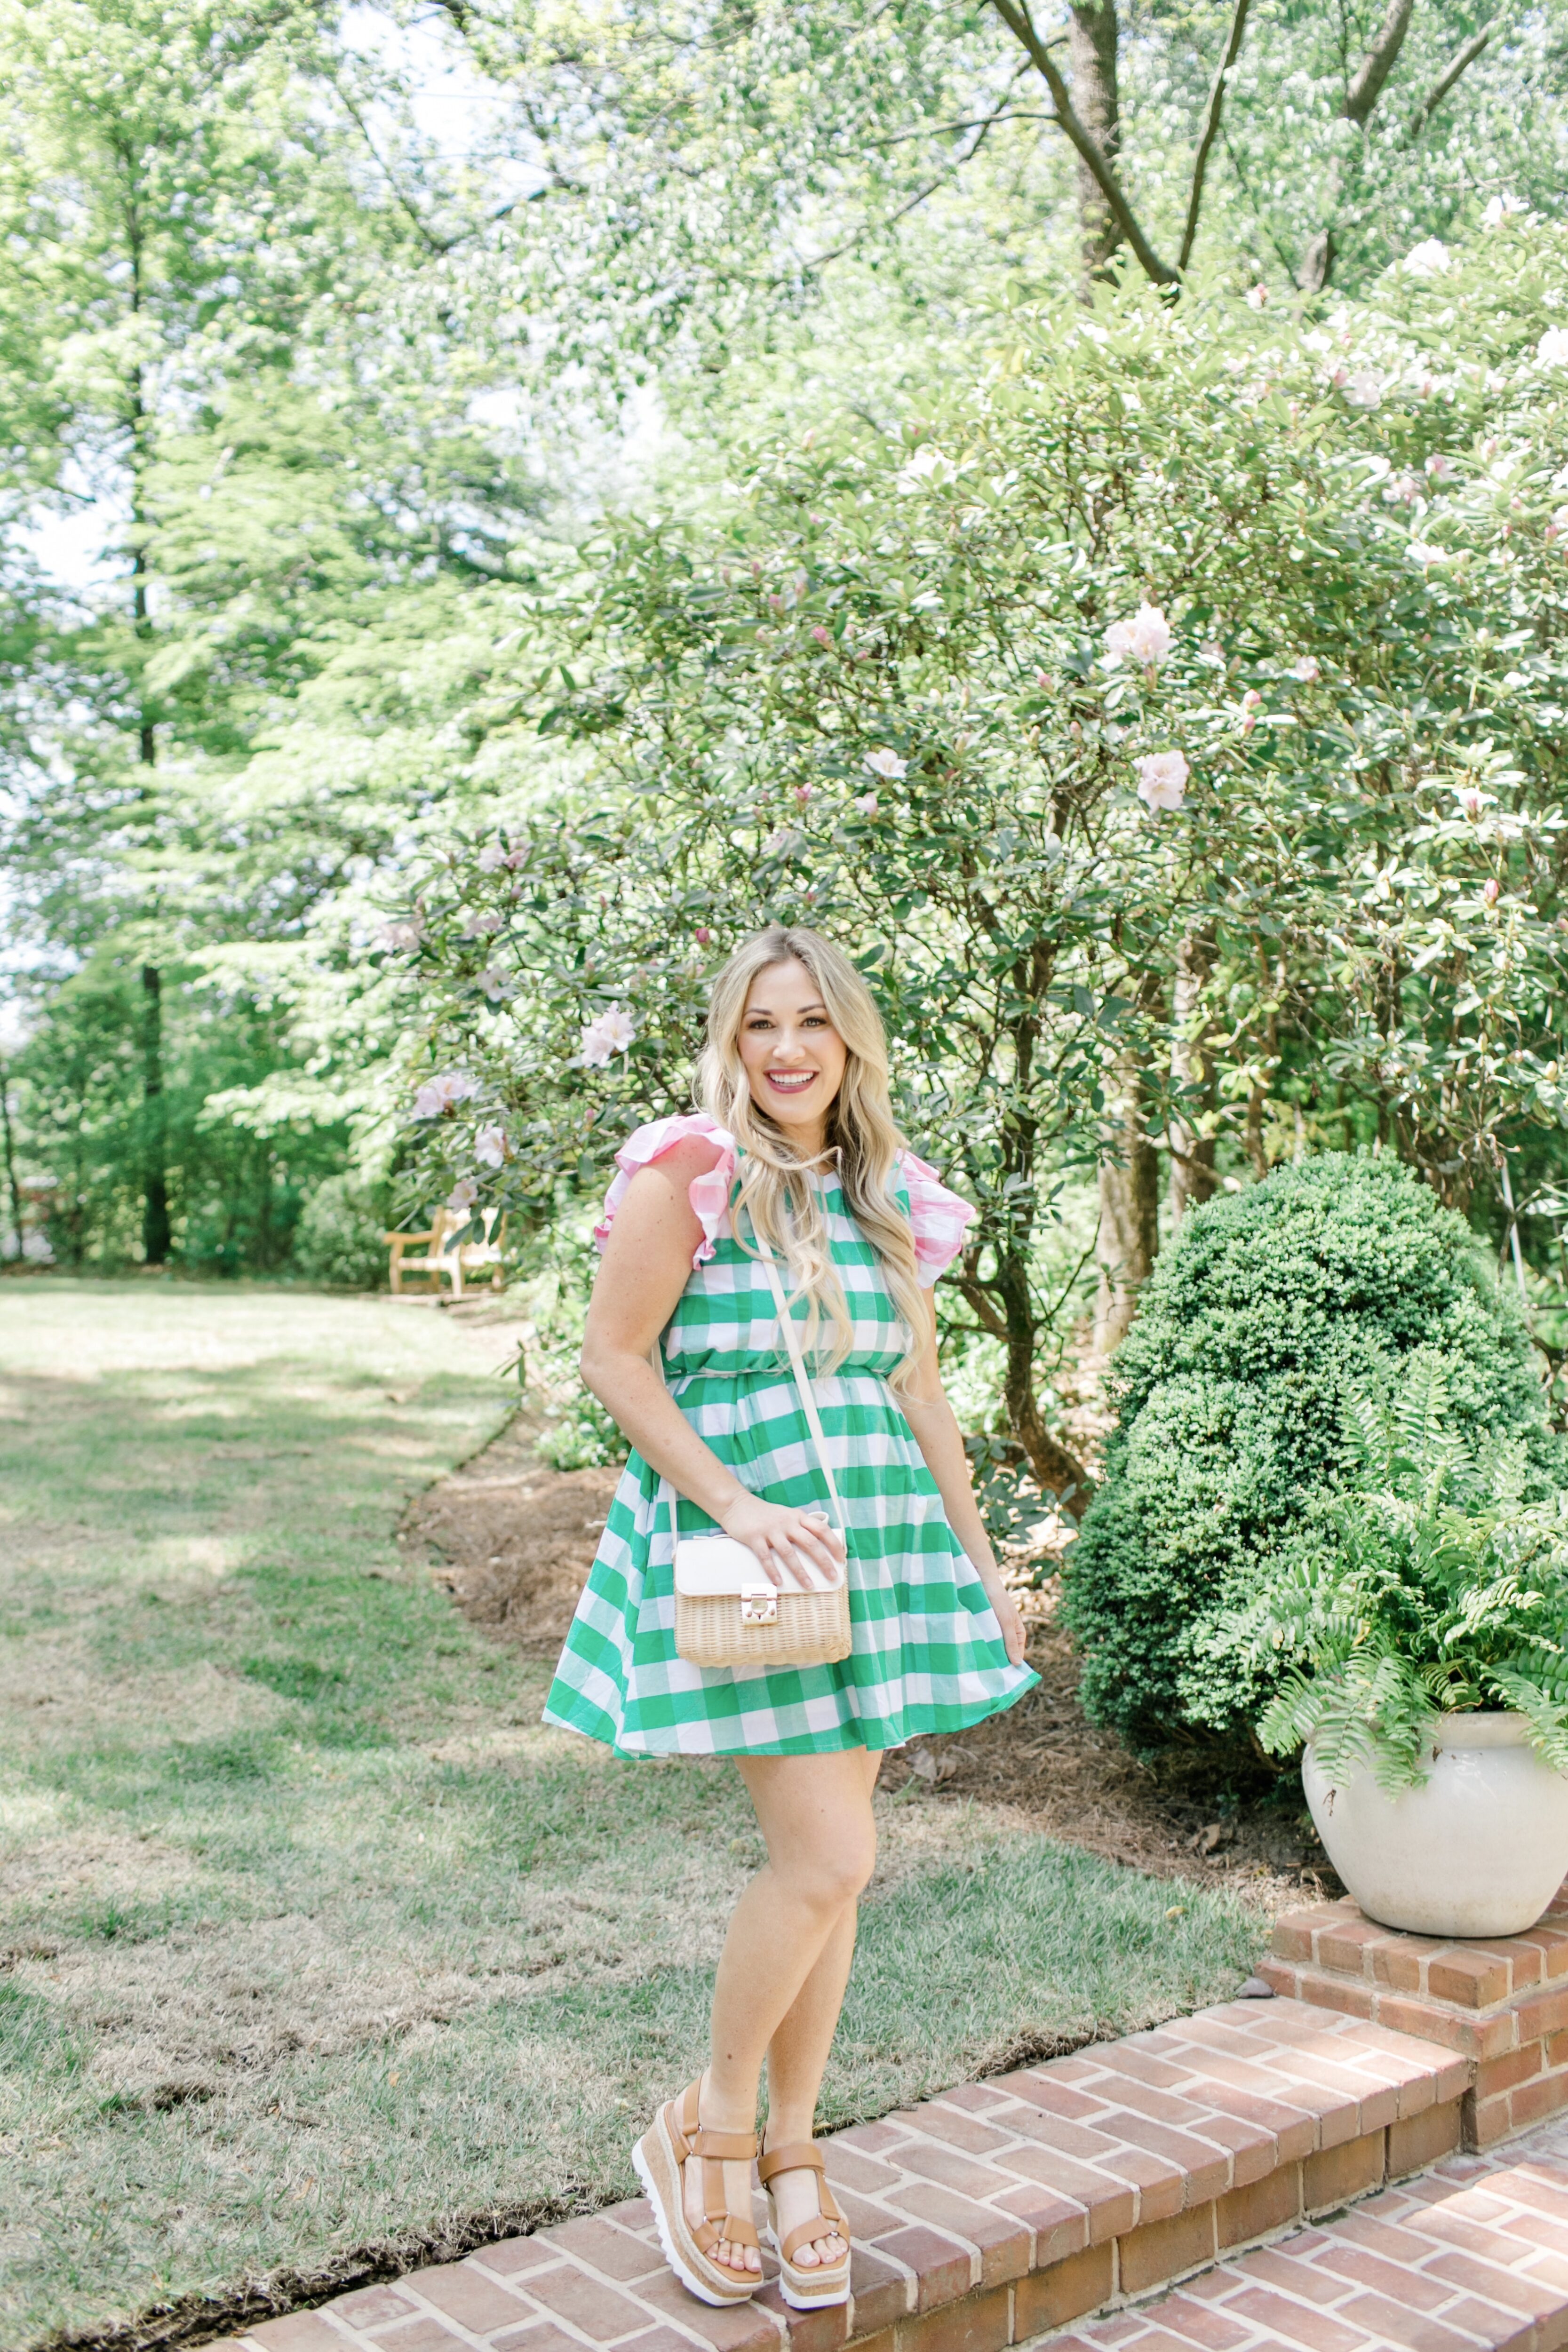 kentucky derby dress: green plaid dress with pink sleeves